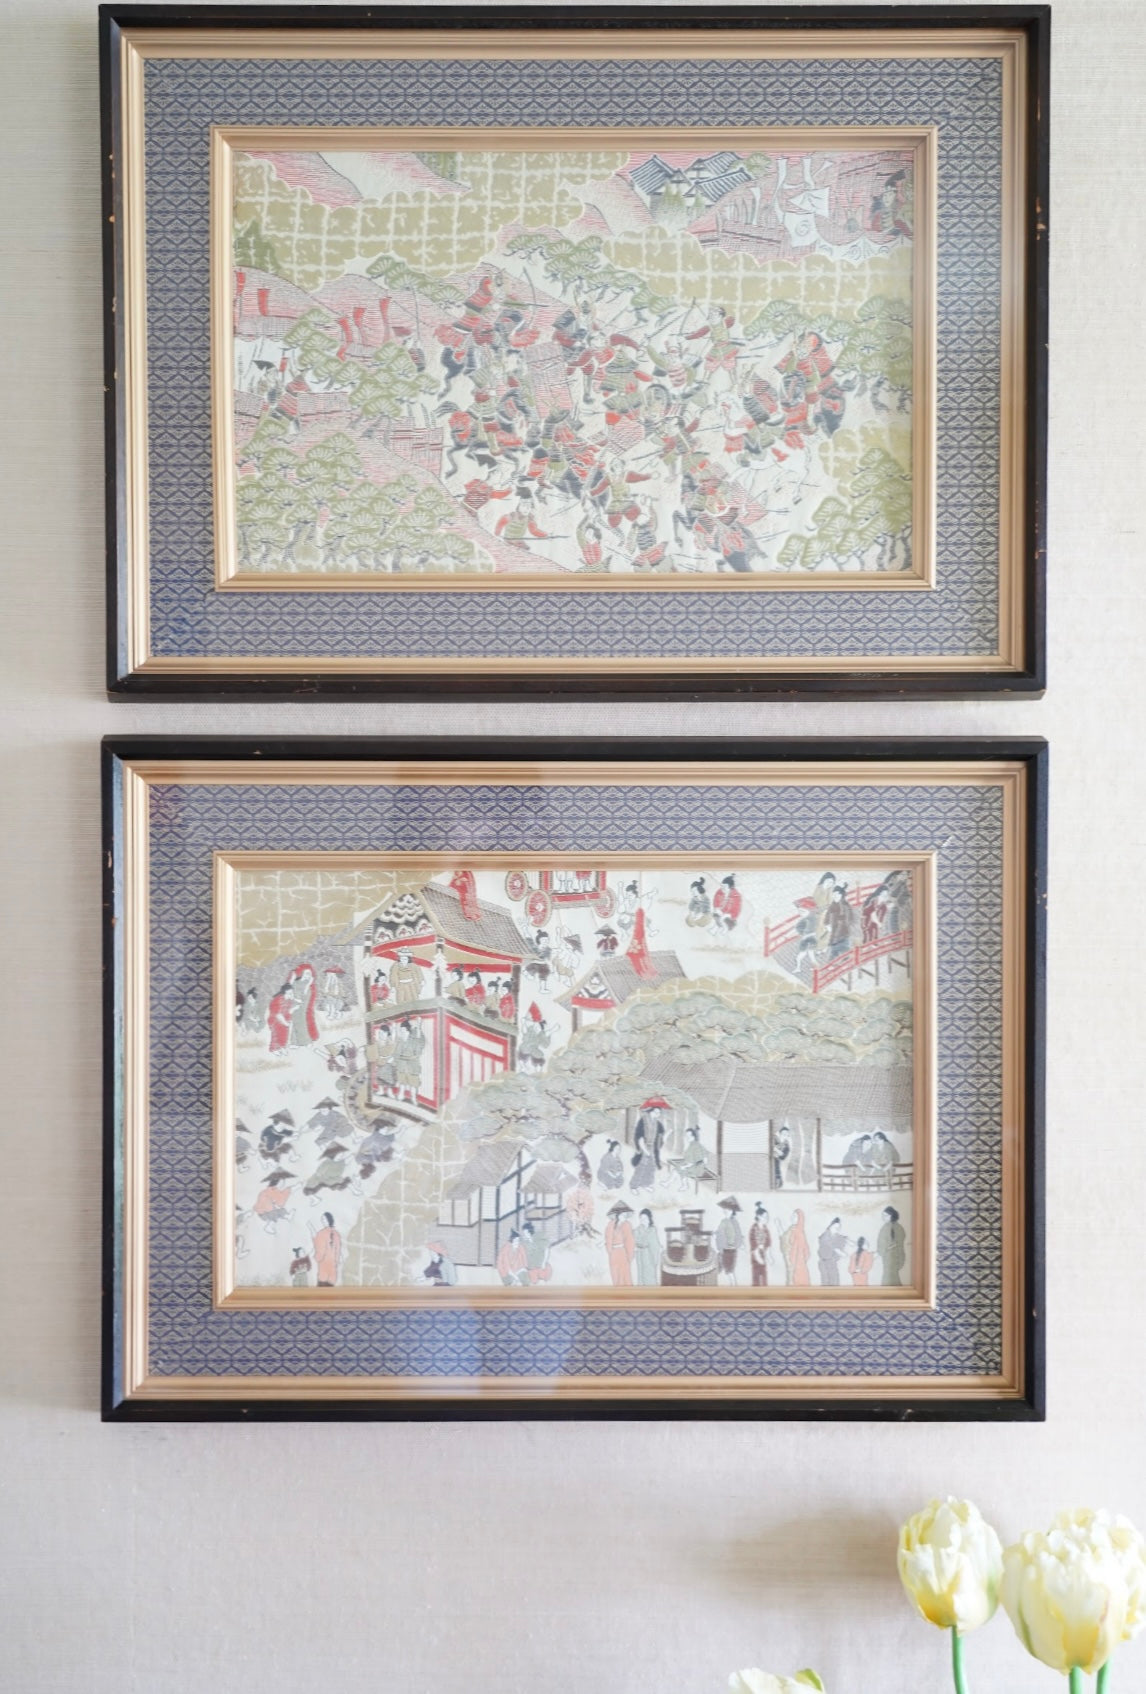 PAIR OF SILK EMBROIDERED FRAMED ART